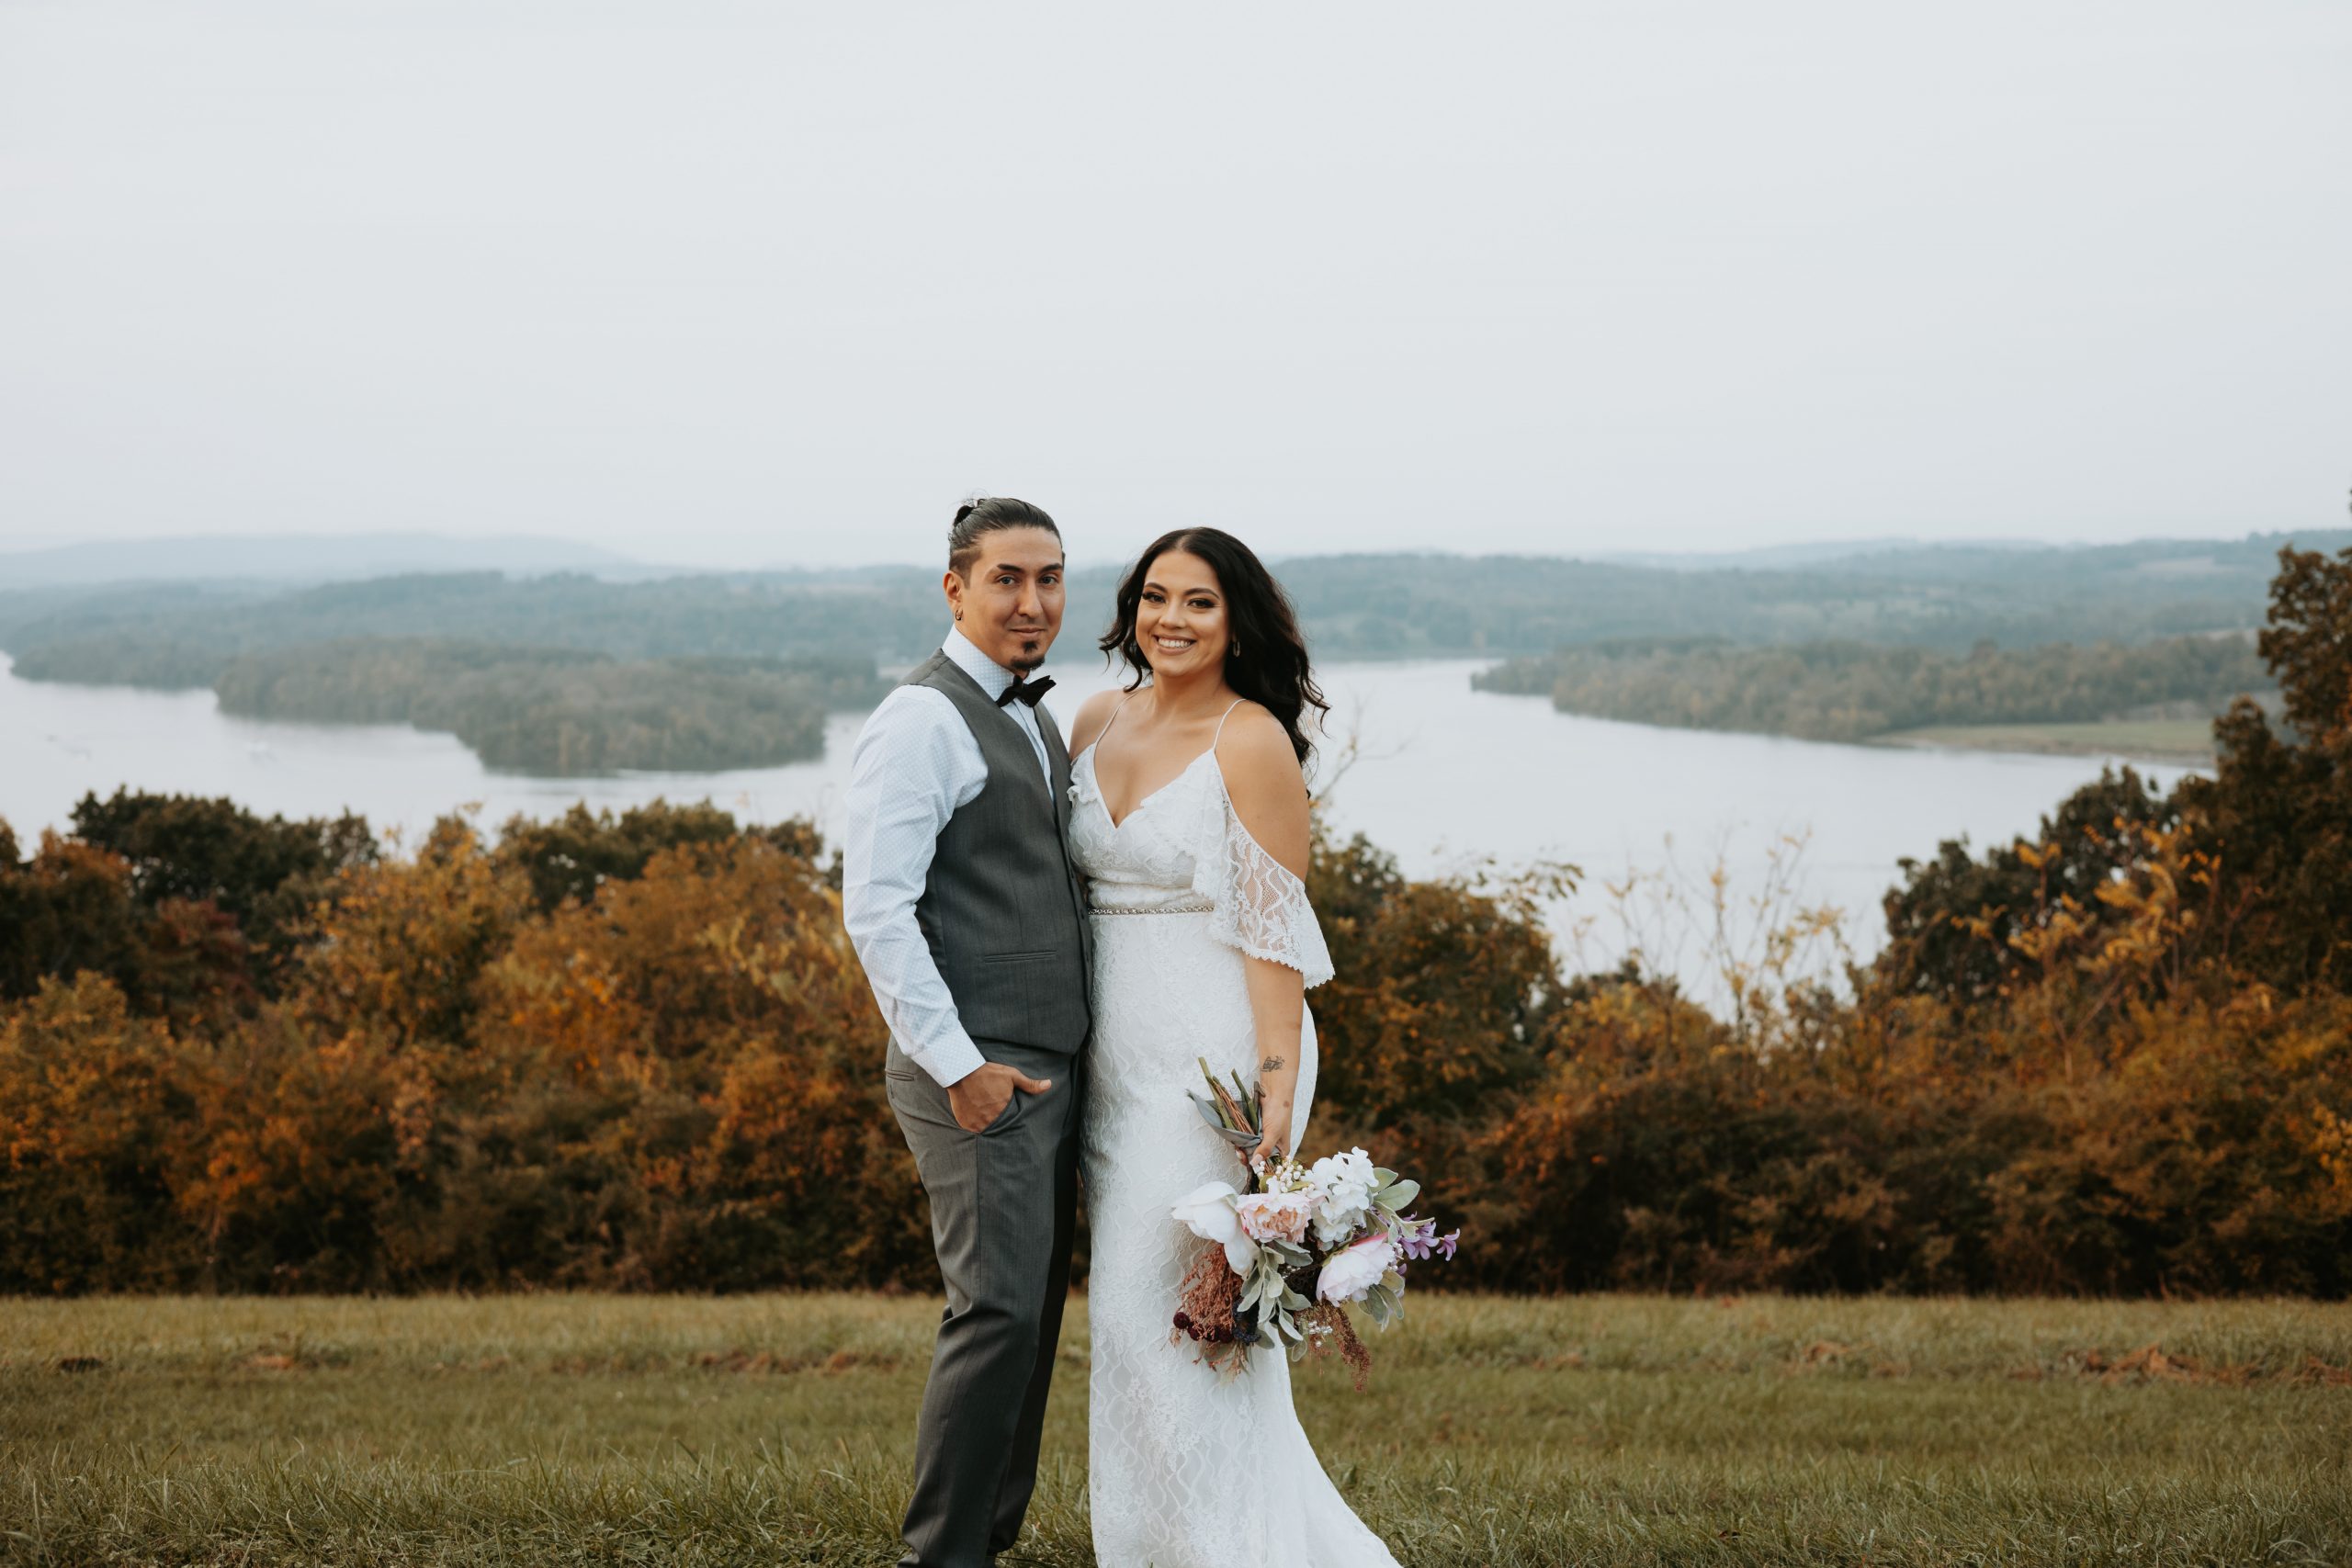 Lorena and Adrian decided to keep their vows small by choosing an intimate Lakeview elopement overlooking Blue Marsh Lake in Reading, PA